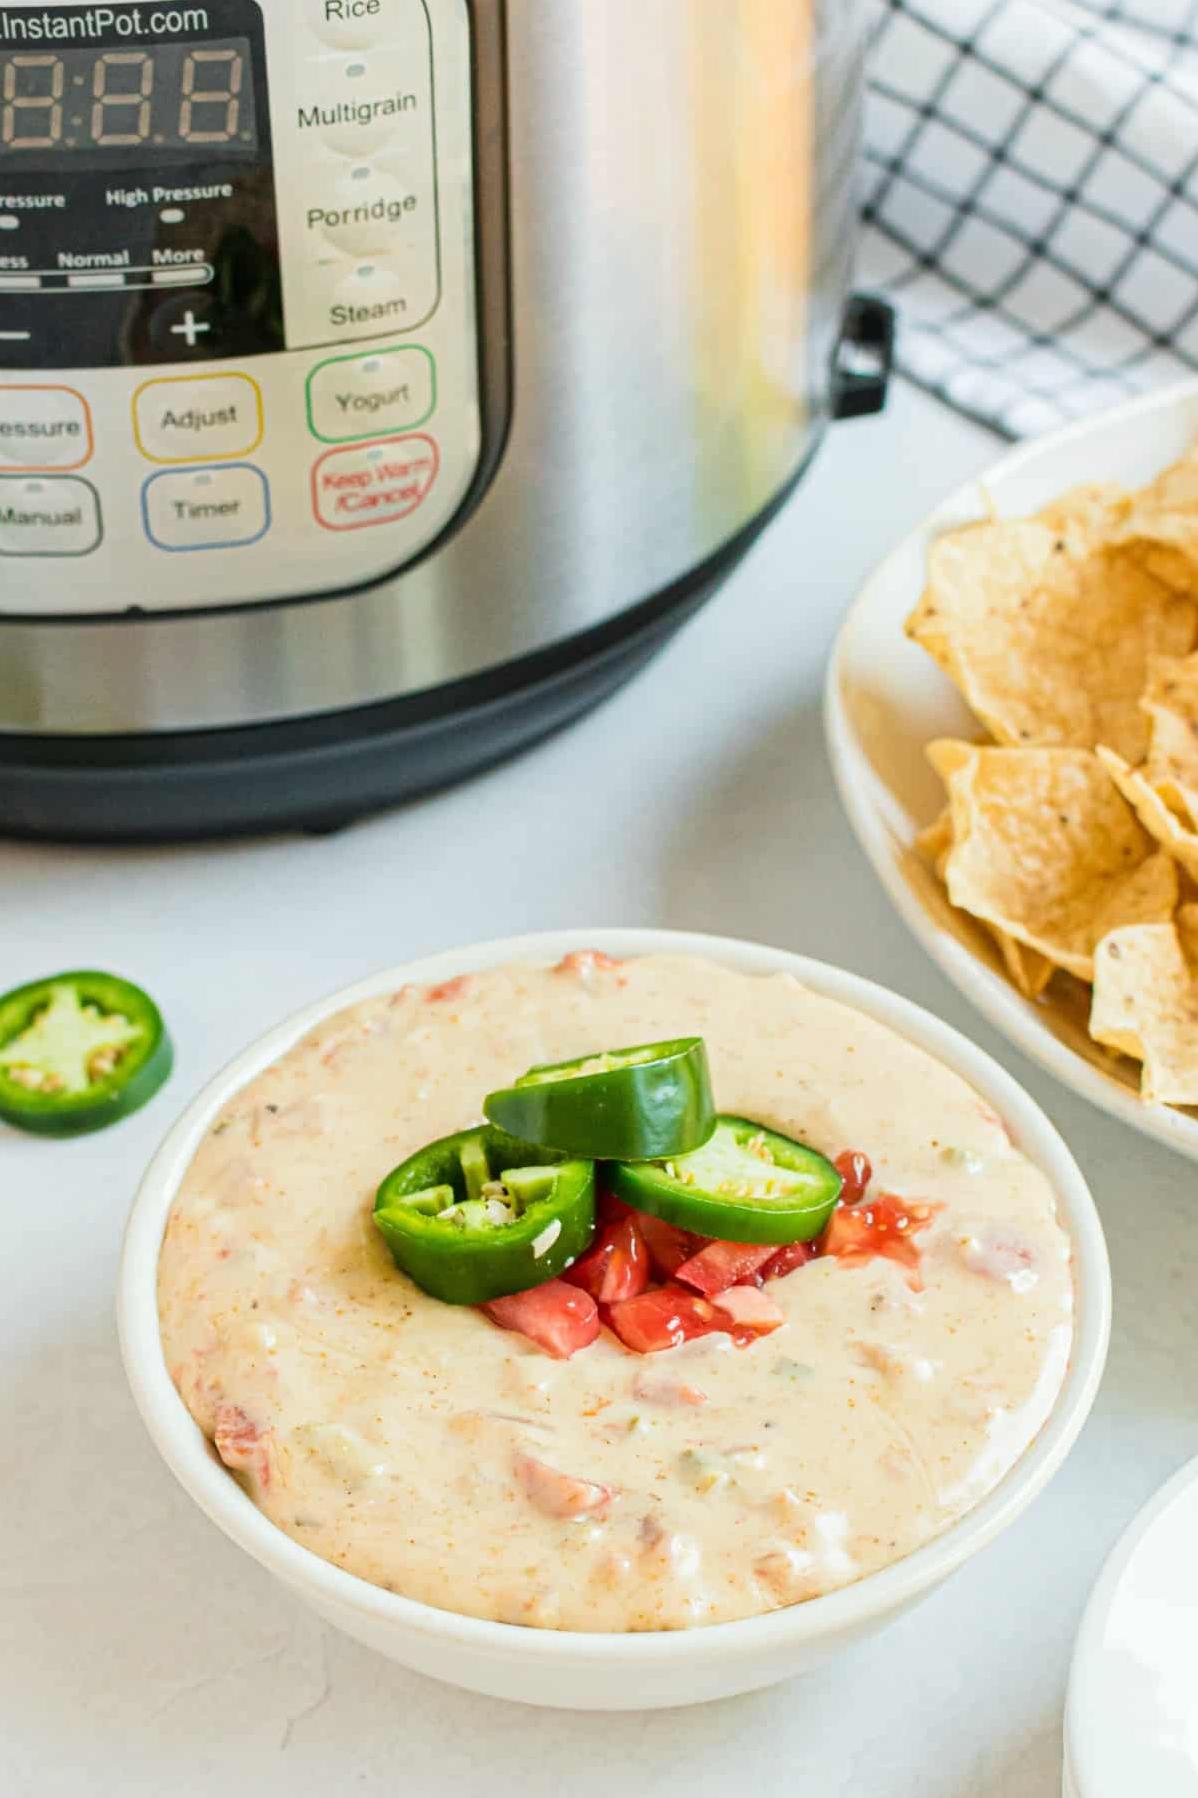  Let's dive into this creamy and savory white queso dip!